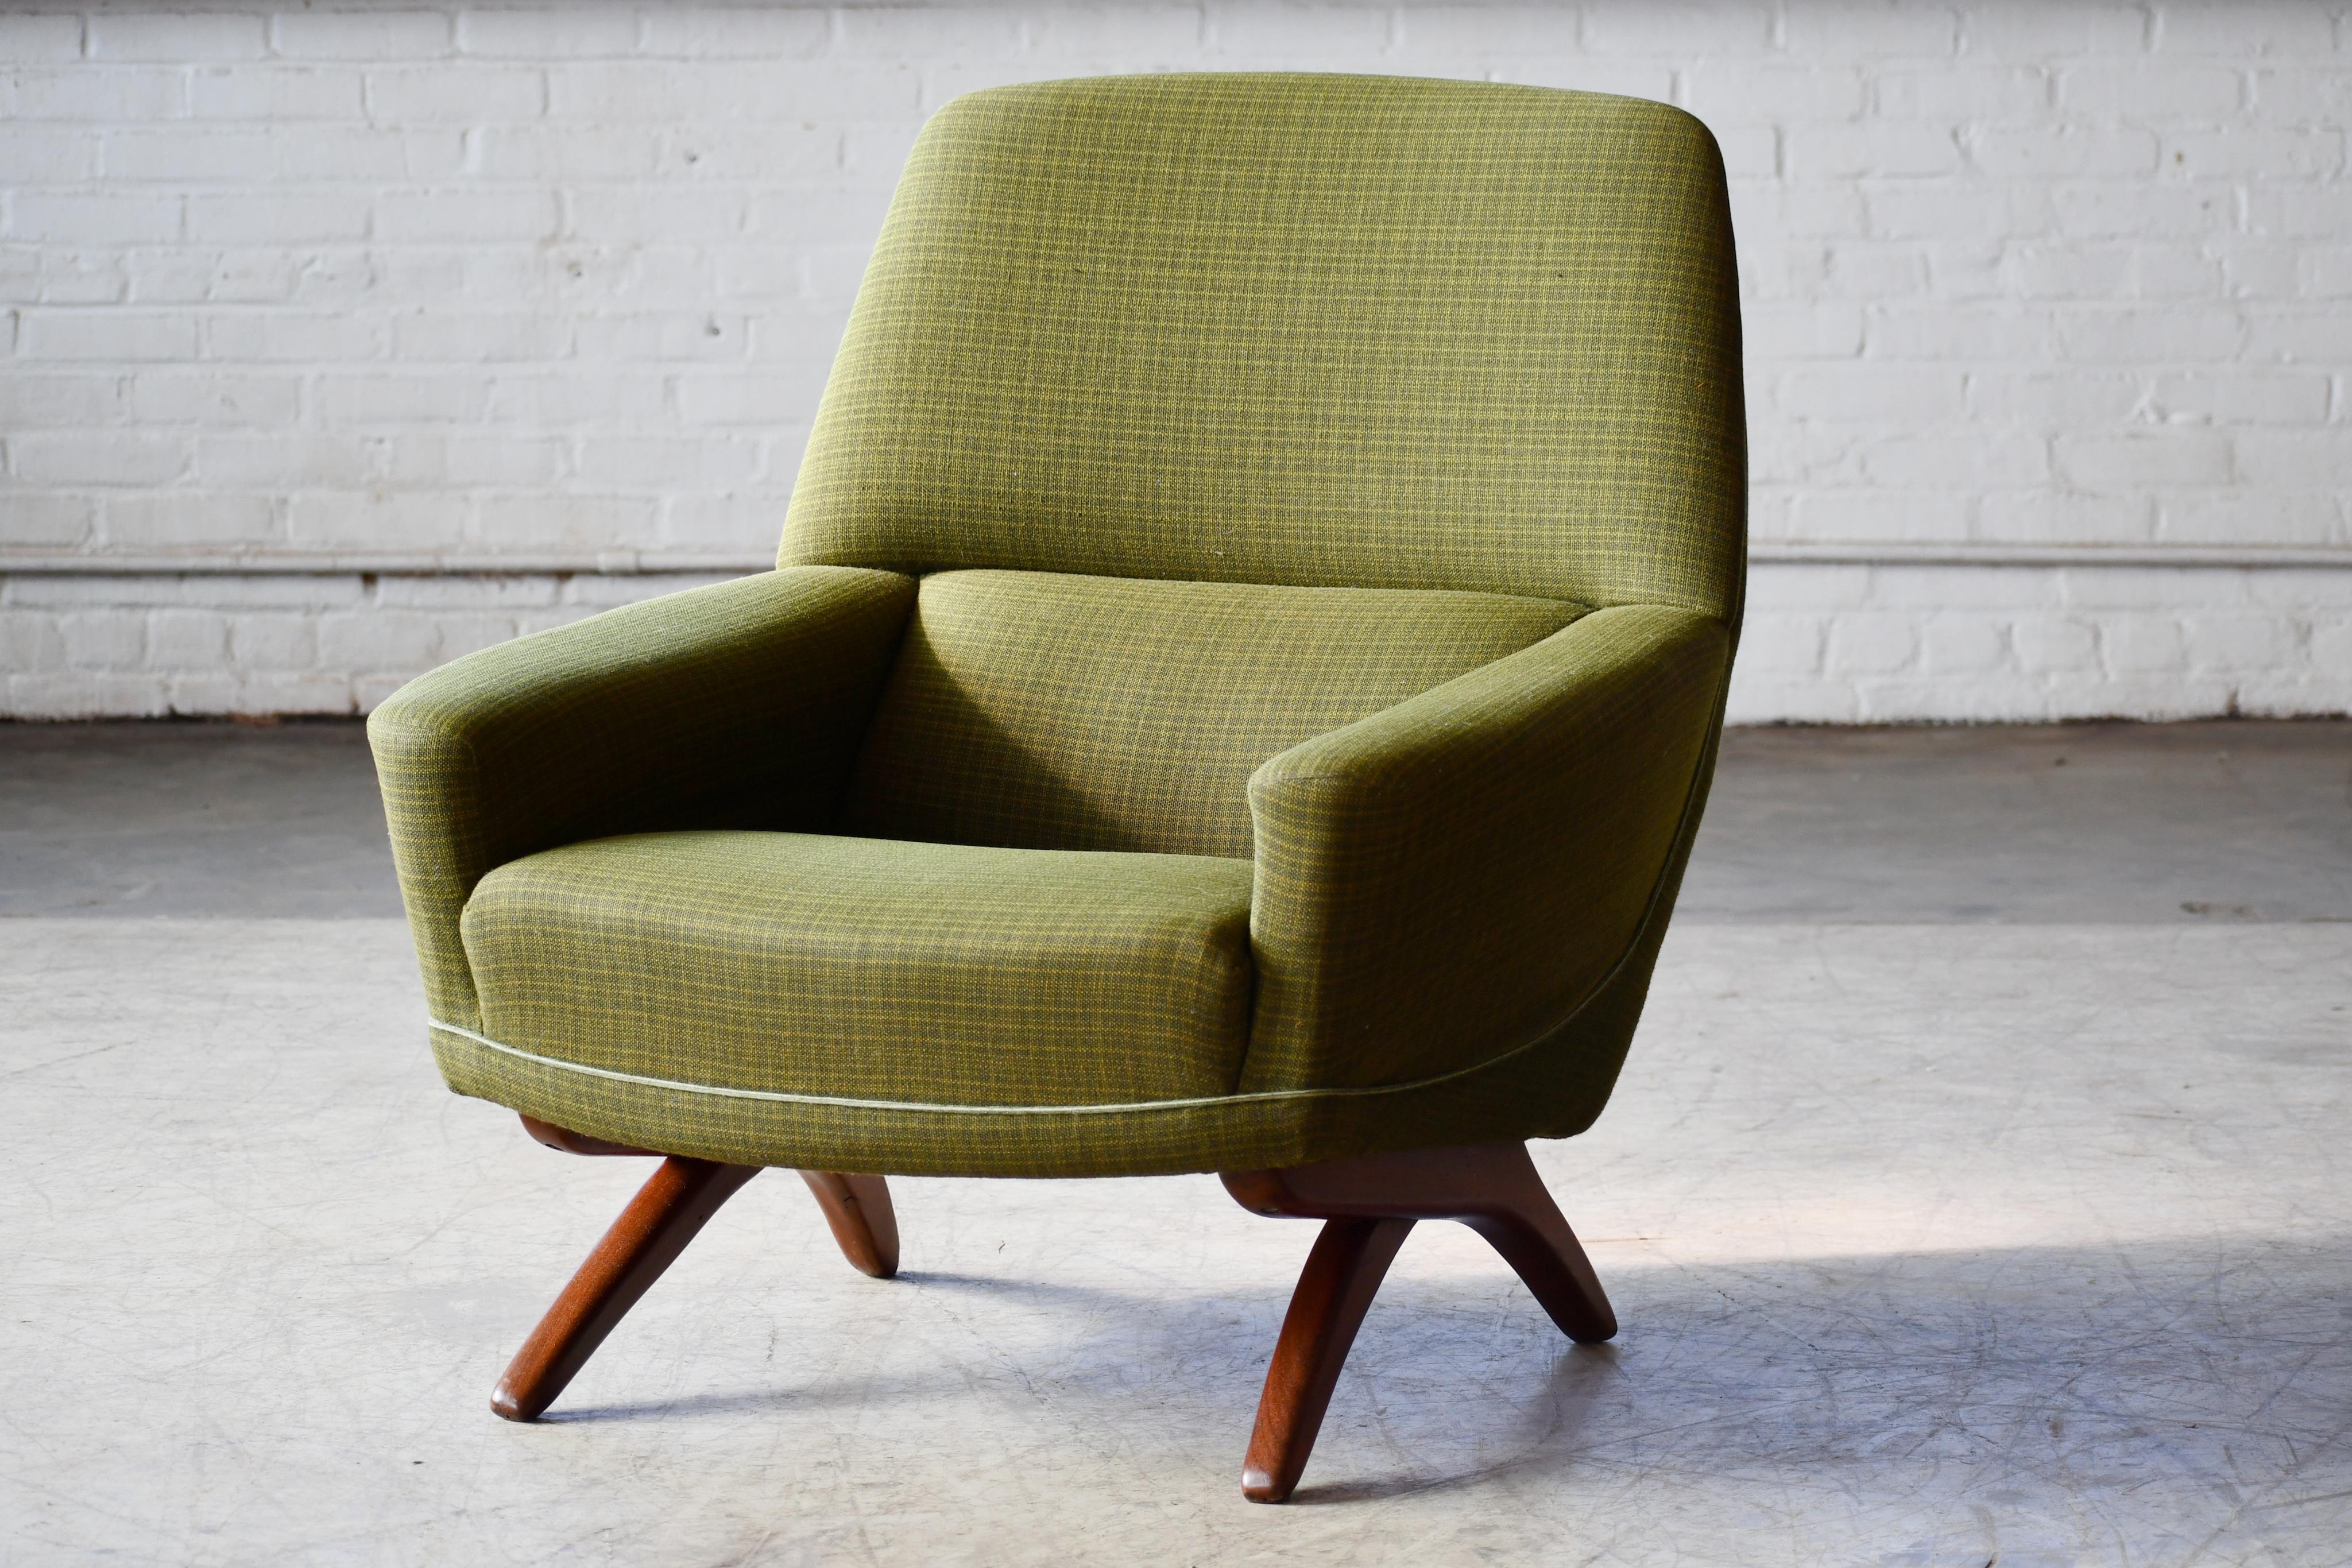 Spectacular design of rounded forms with scissor style base - Classic Illum Wikkelso design made by Aarhus Polstermobelfabrik in the 1960s. Stunning profile and superb comfort. The original wool fabric and foam padding are in good usable original